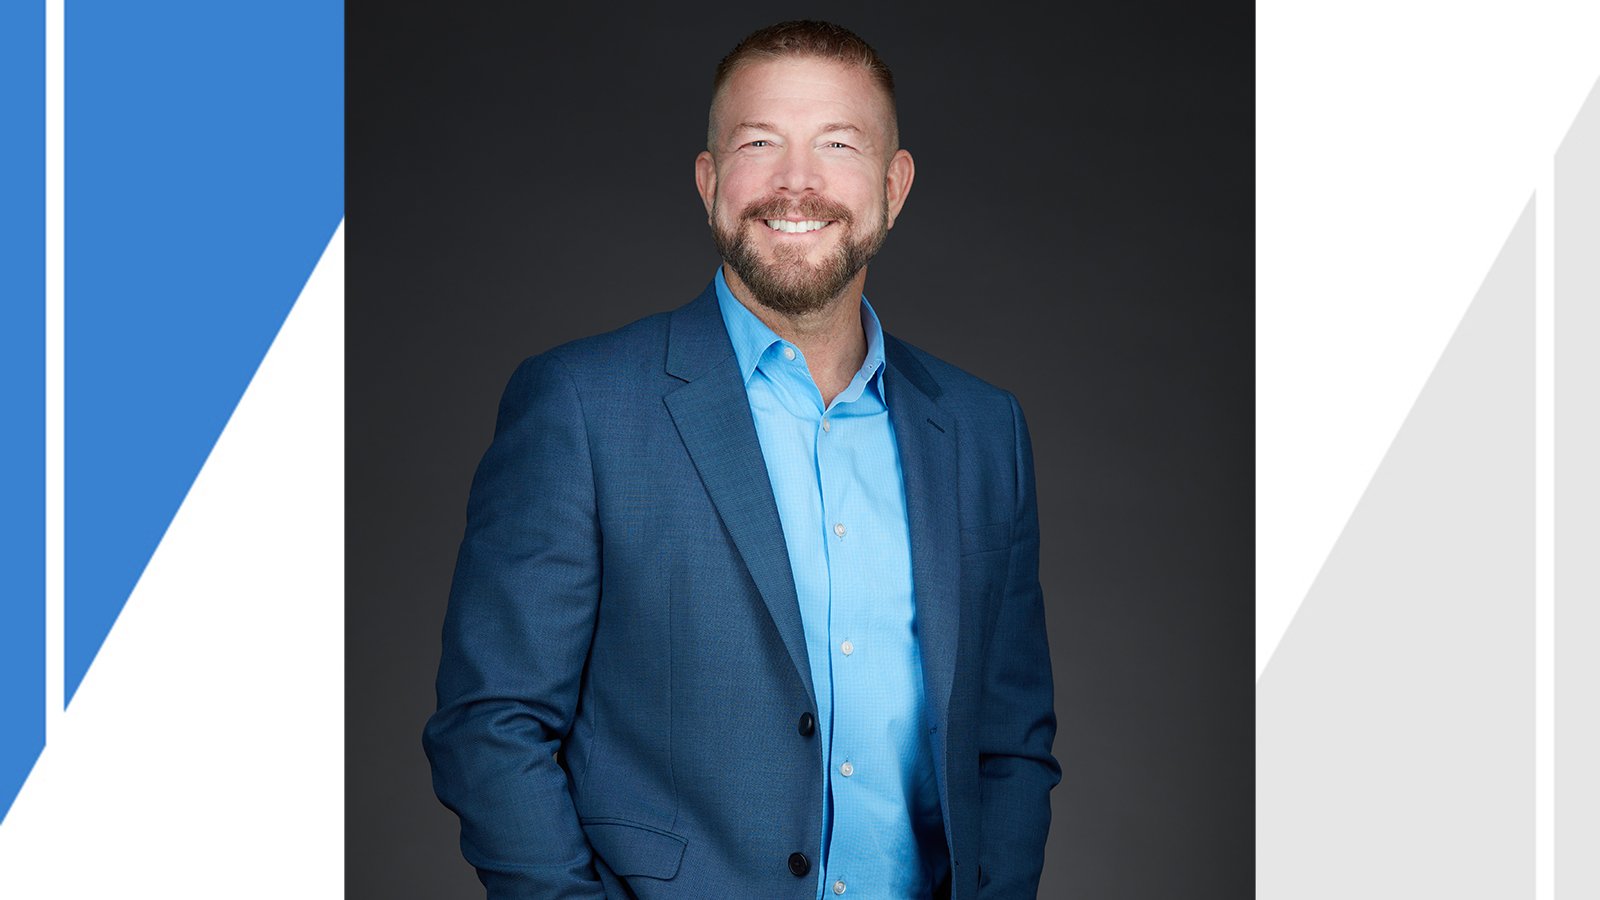 Brian Ruede Announced as new CEO of QuintEvents